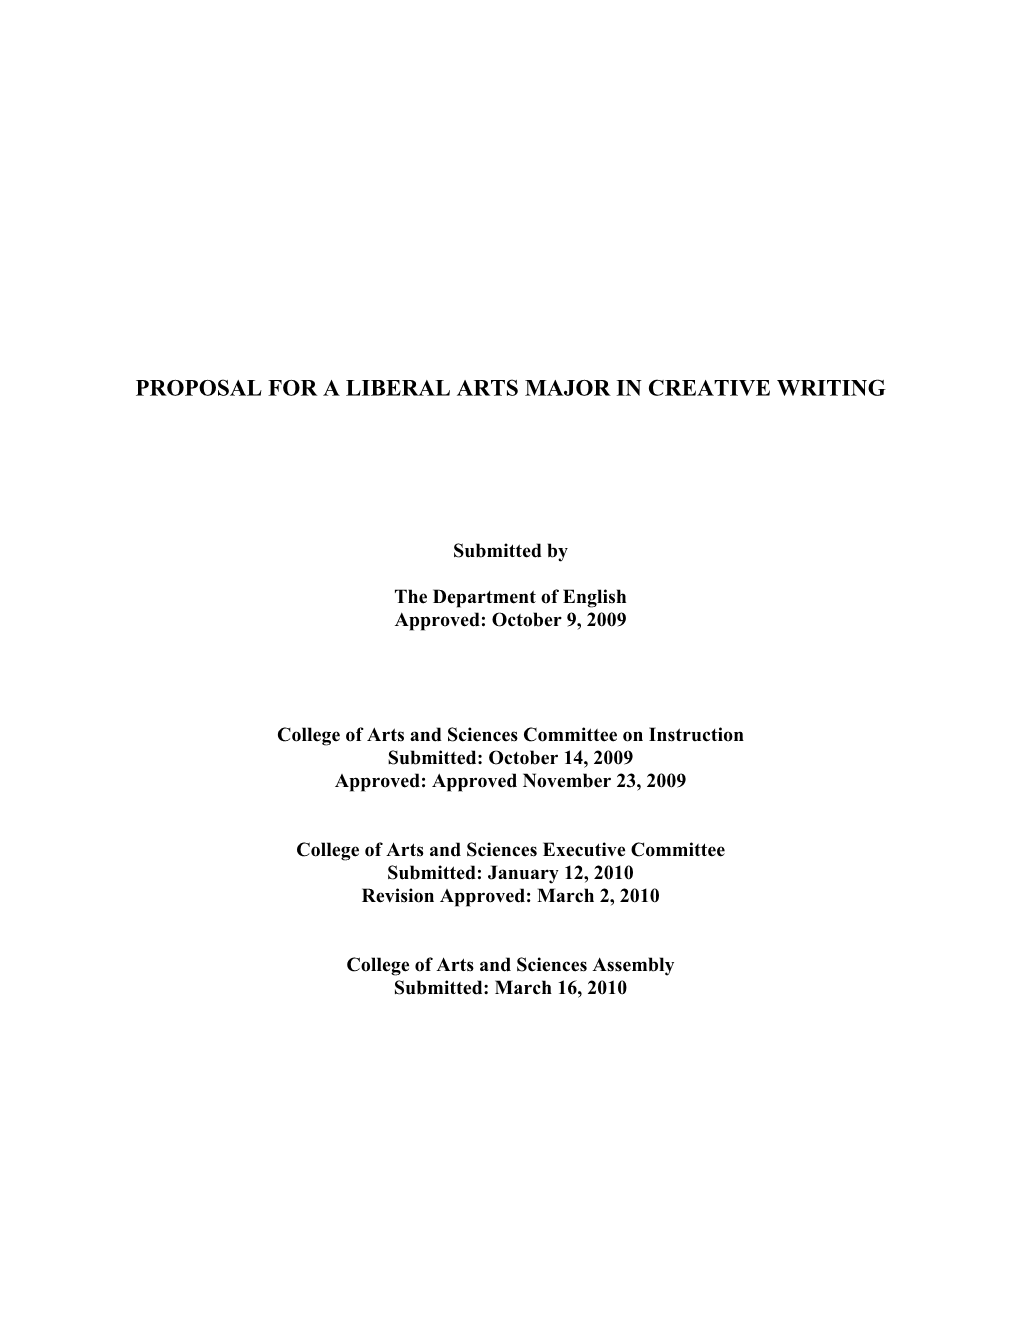 Proposal for a Liberal Arts Major in Creative Writing